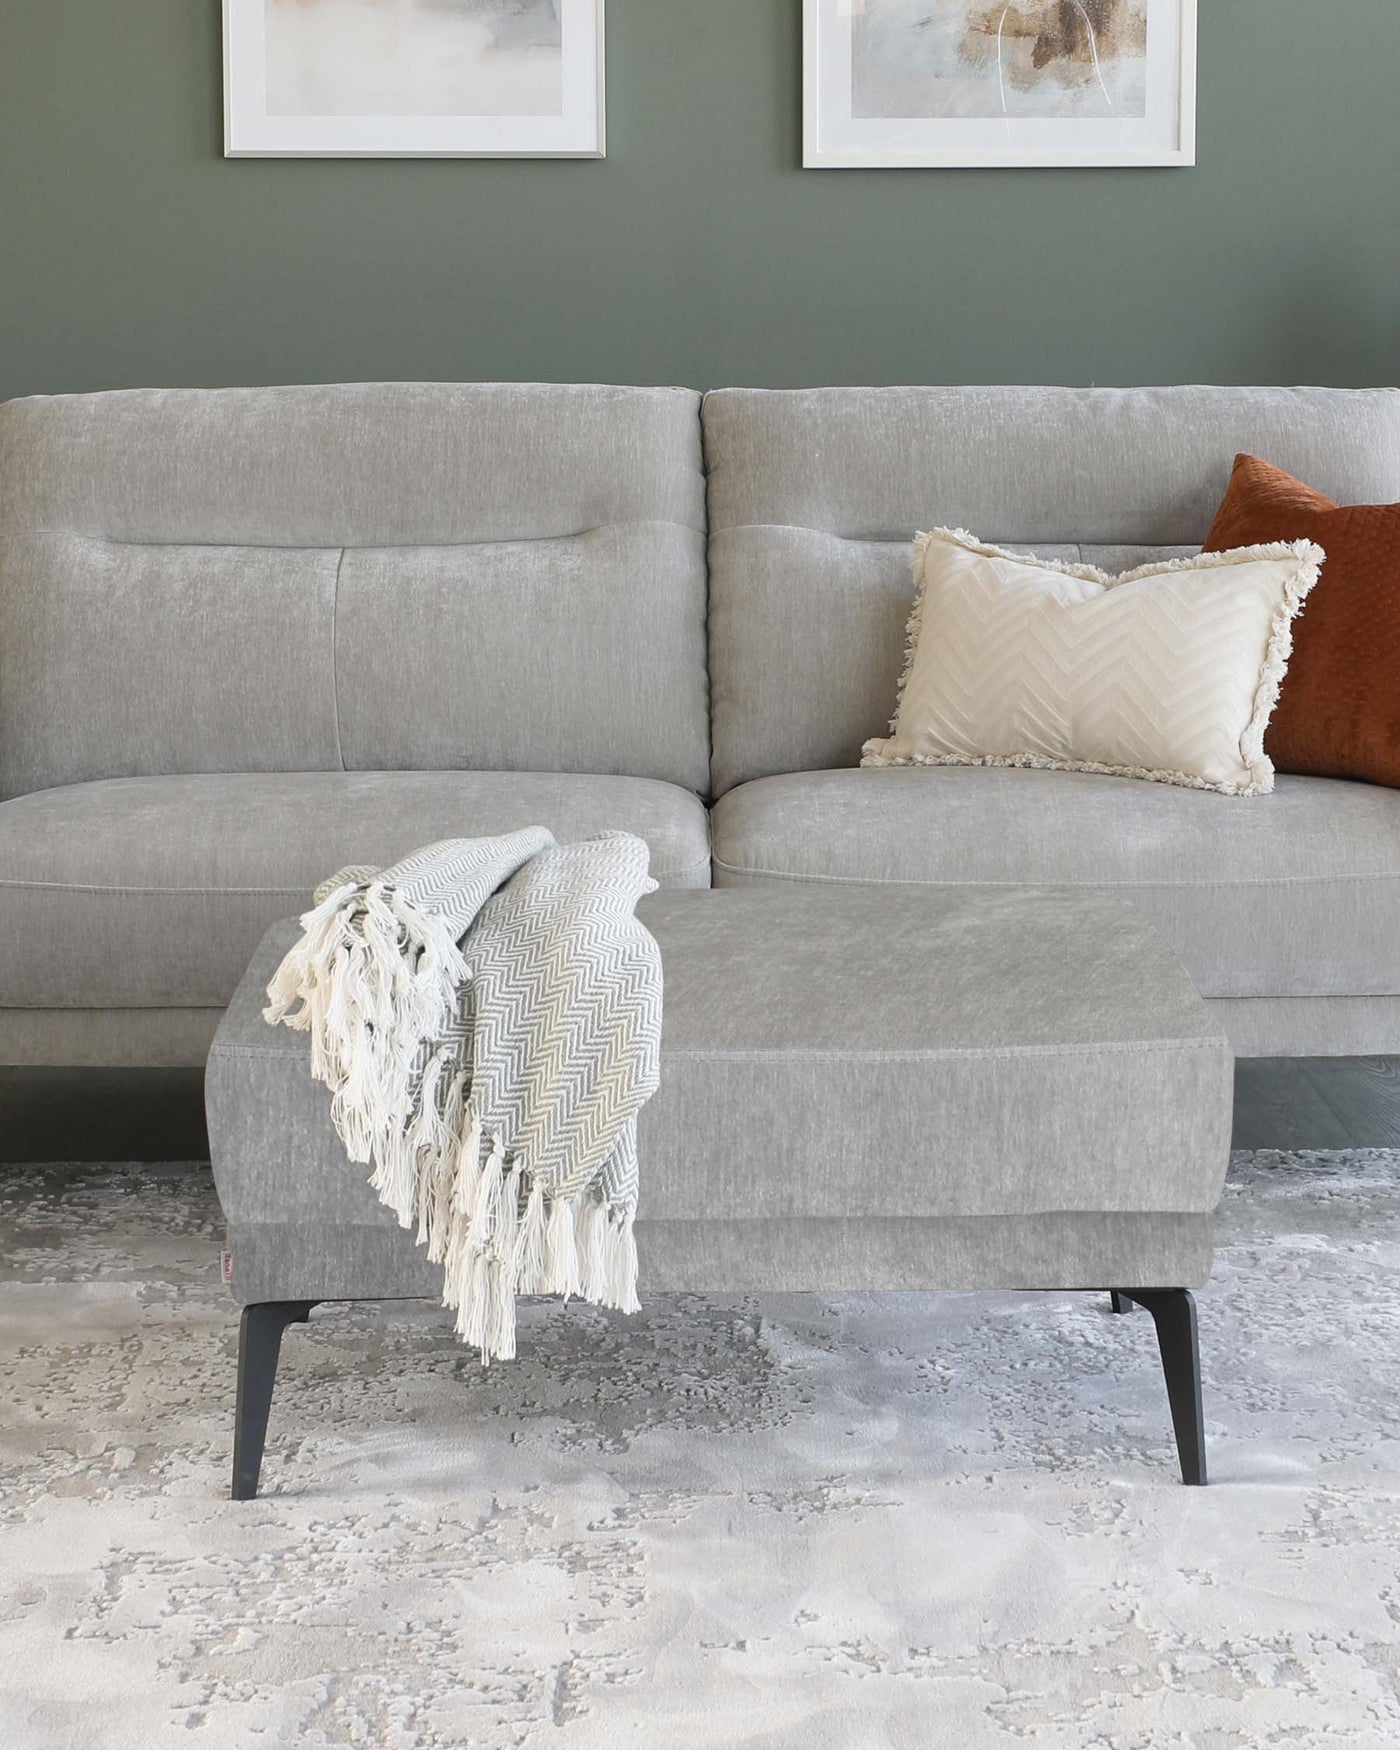 Contemporary grey sectional sofa with textured upholstery and plush cushions, complemented by a matching grey ottoman with an angular black metal base. Accents include a cream fringed throw and decorative pillows in earth tones.